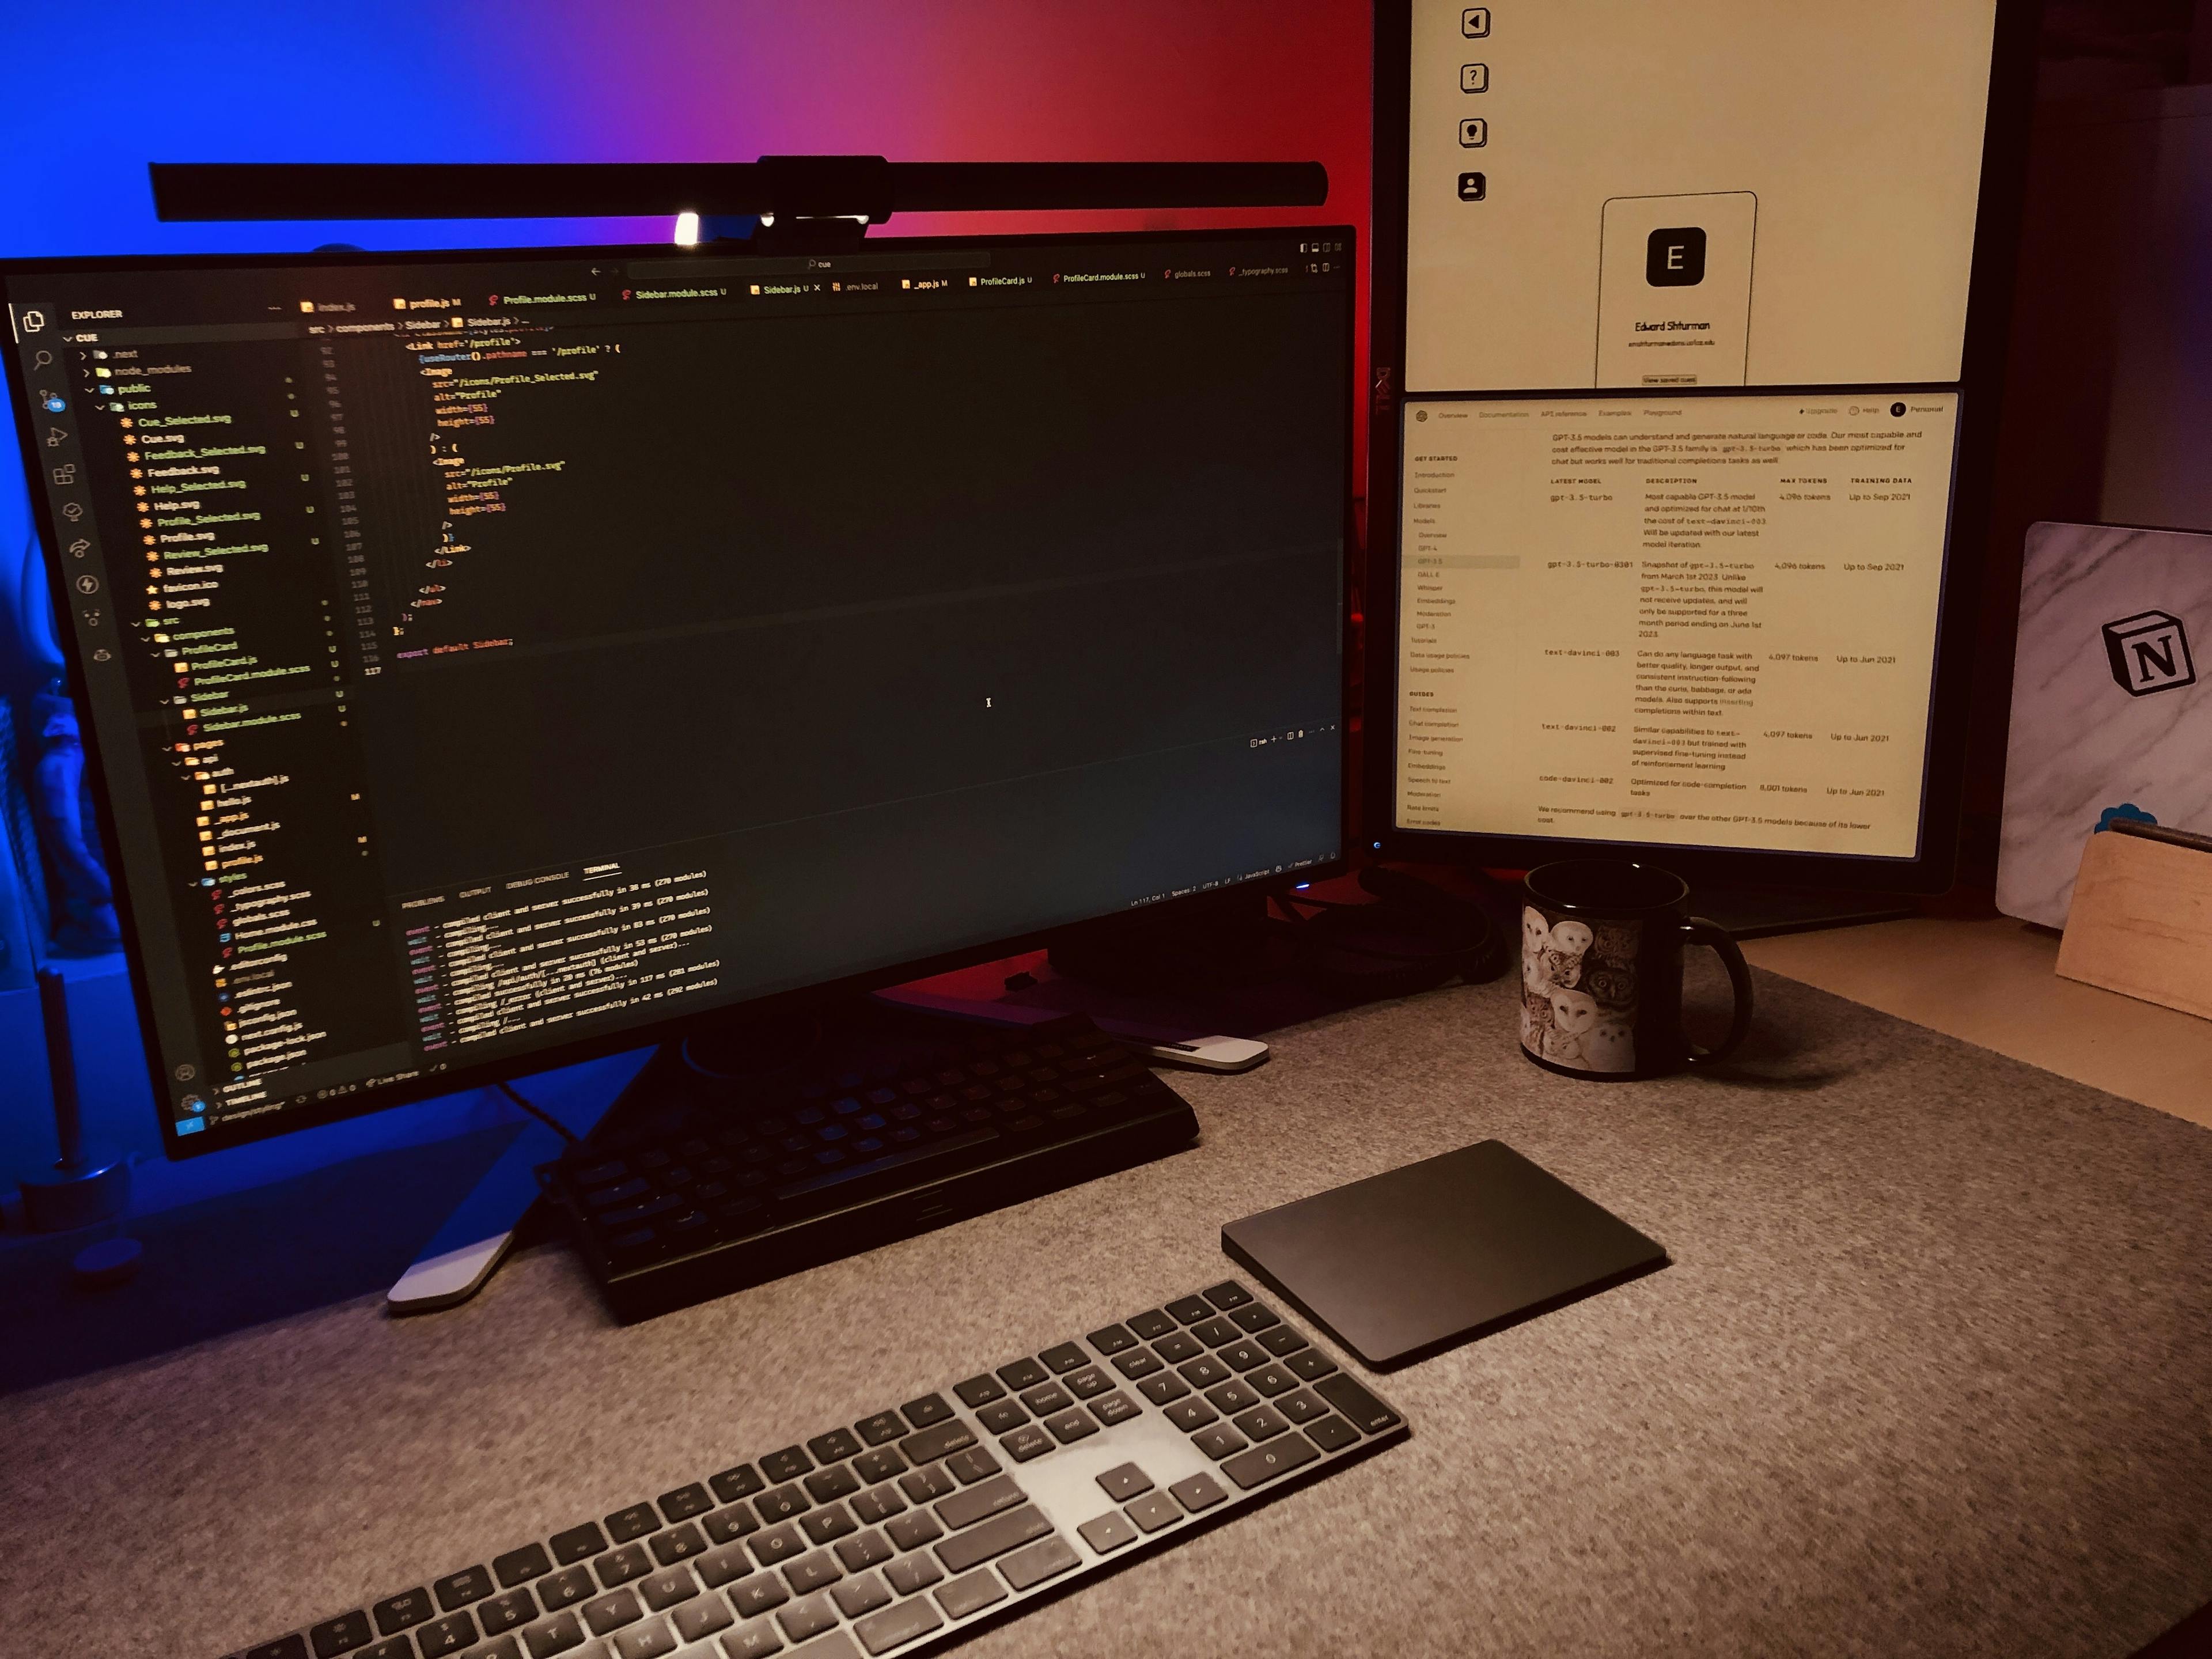 My desk setup on Saturday night. Pictured is my dual-monitor setup (code on one, API docs and live preview on the other) and a cup of tea.